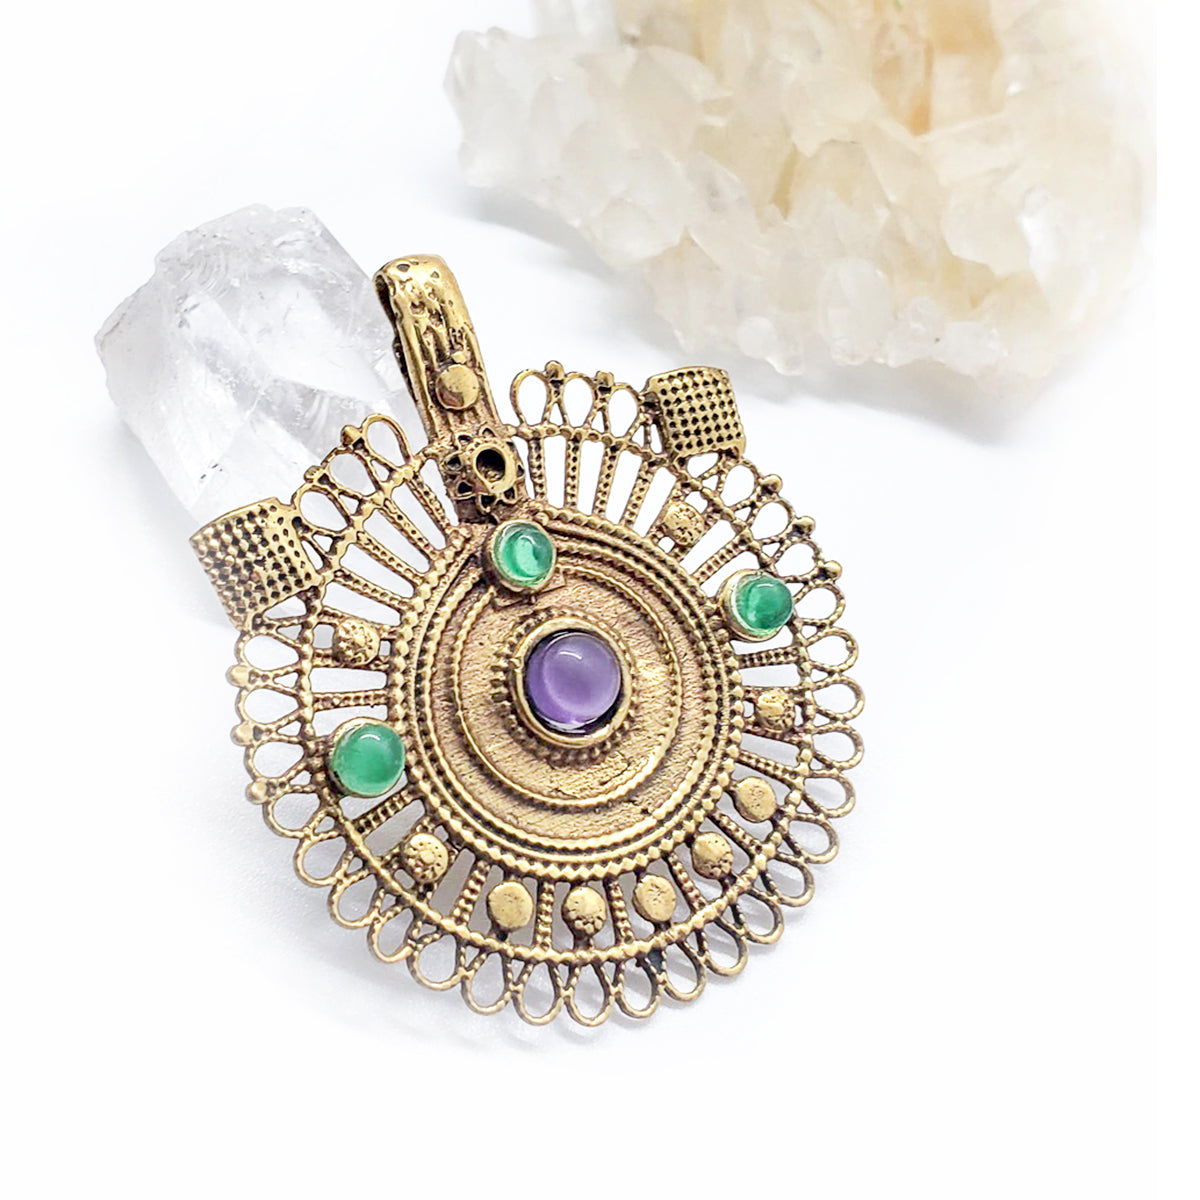 Recycled Brass Bejeweled Statement Pendant - Green Apatite & Amethyst Gemstone